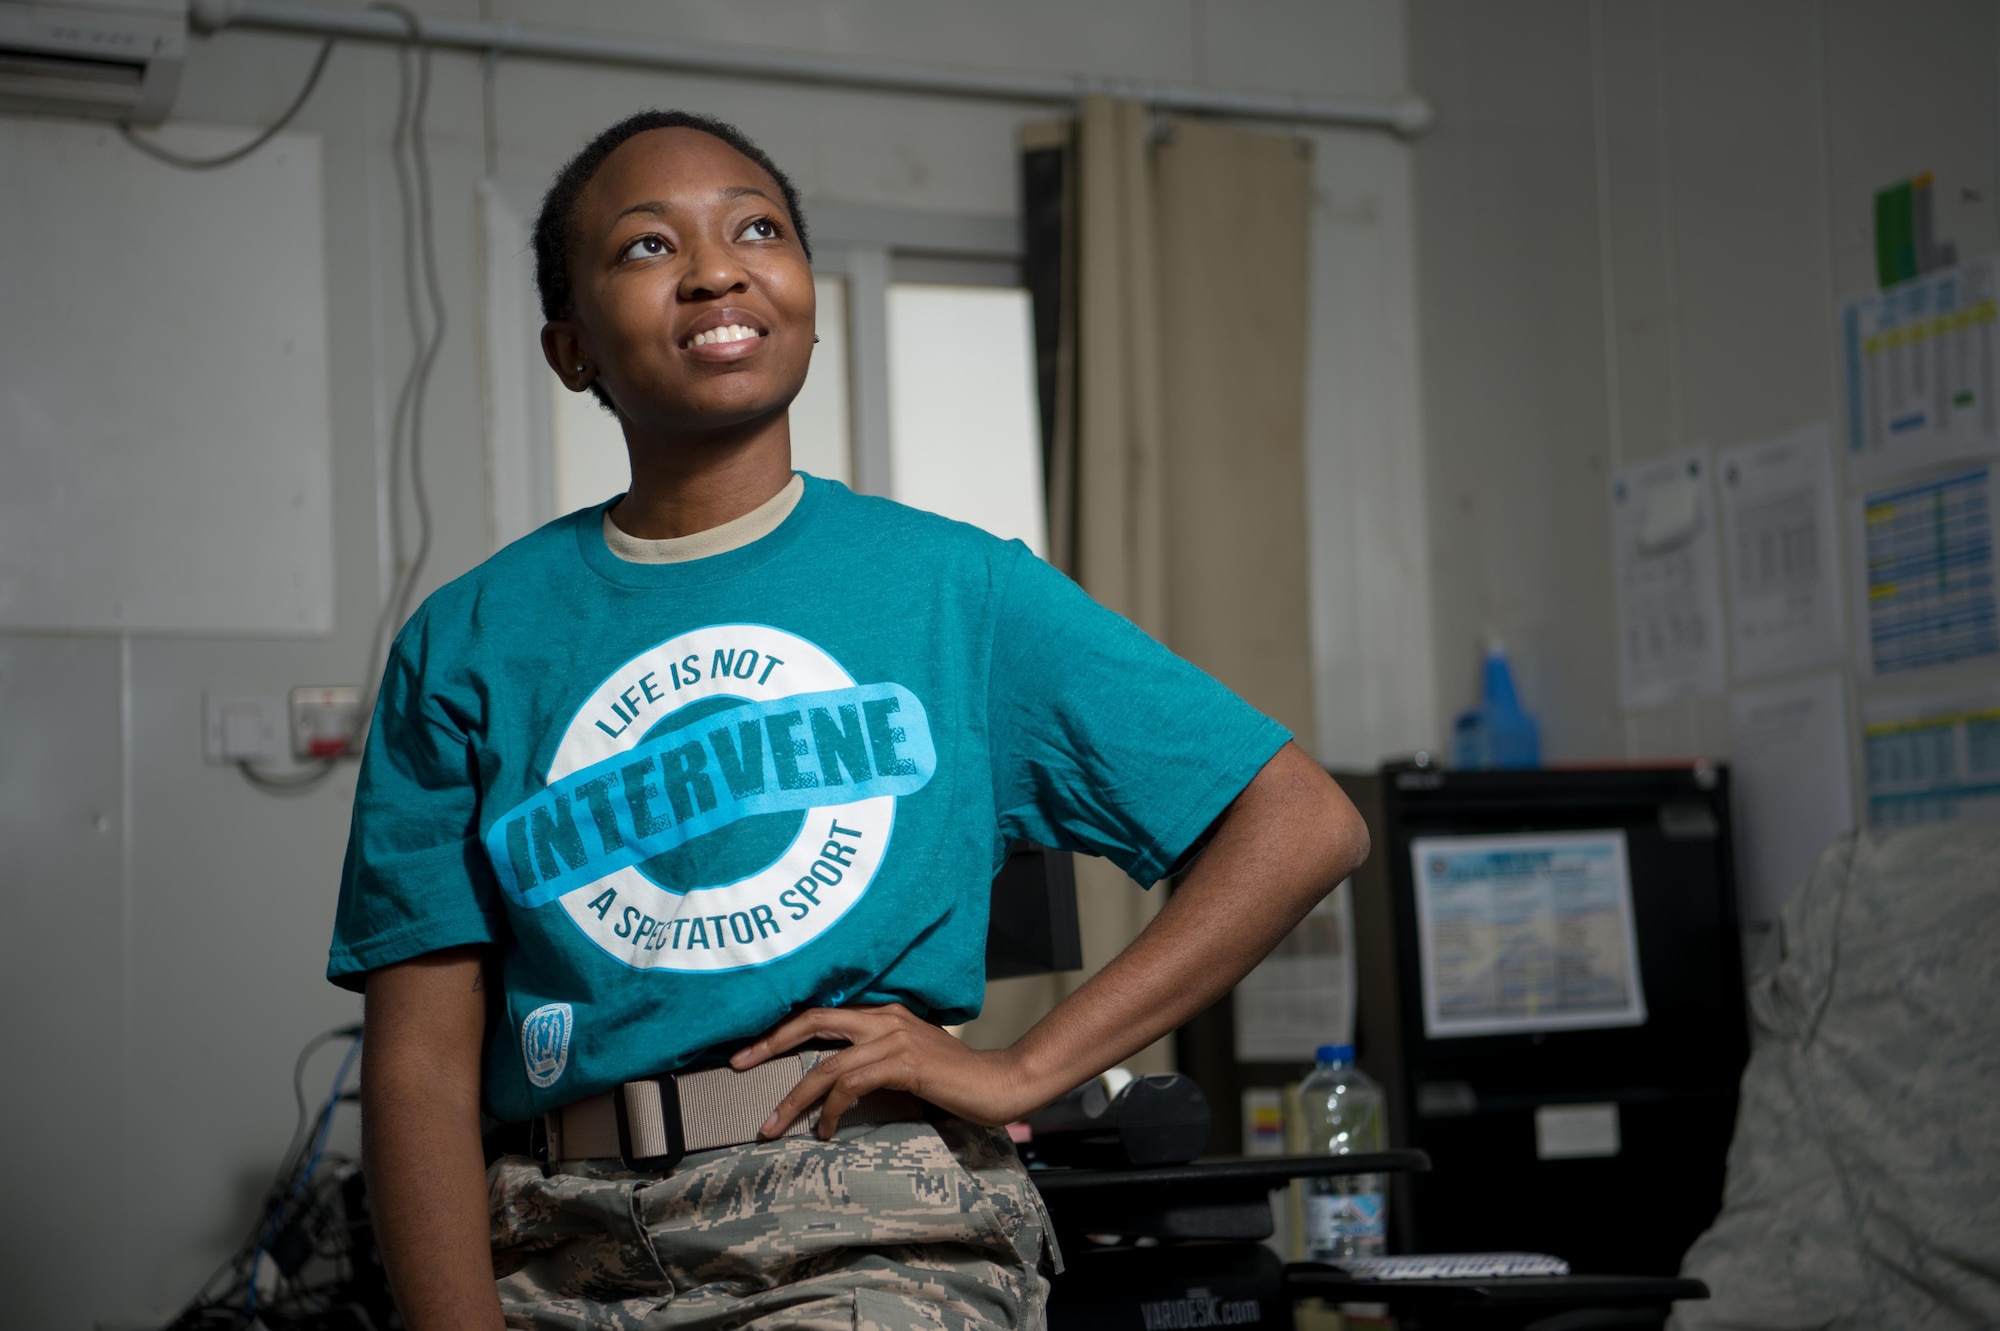 386th Air Expeditionary Wing sexual assault response coordinator 1st Lt. Chandrika Brewton poses for a photo in her office Tuesday August 8, 2017, in an undisclosed location in Southwest Asia. (U.S. Air Force photo by 1st Lt. Rashard Coaxum)